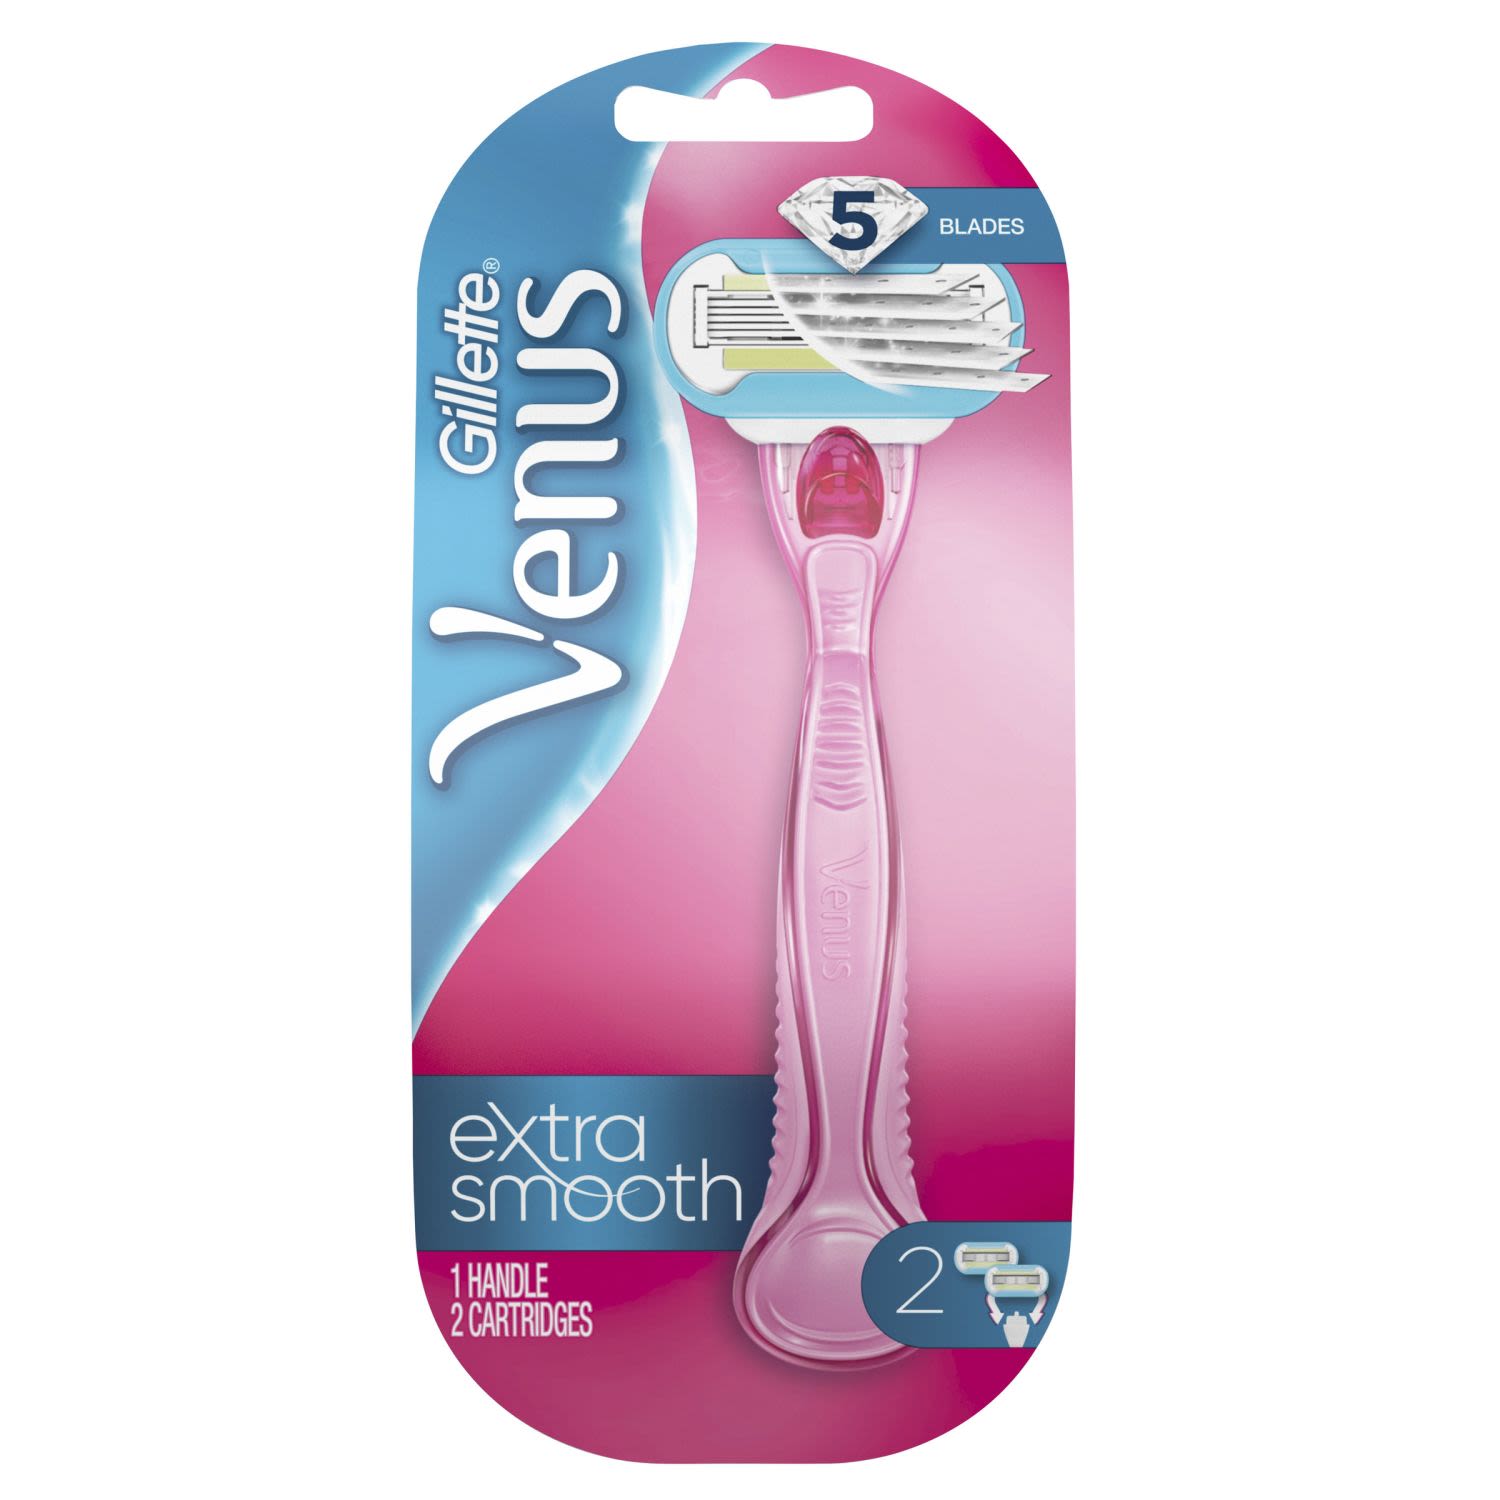 Gillette Venus Extra Smooth Pink Women's Razor Handle With 2 Refills, 1 Each